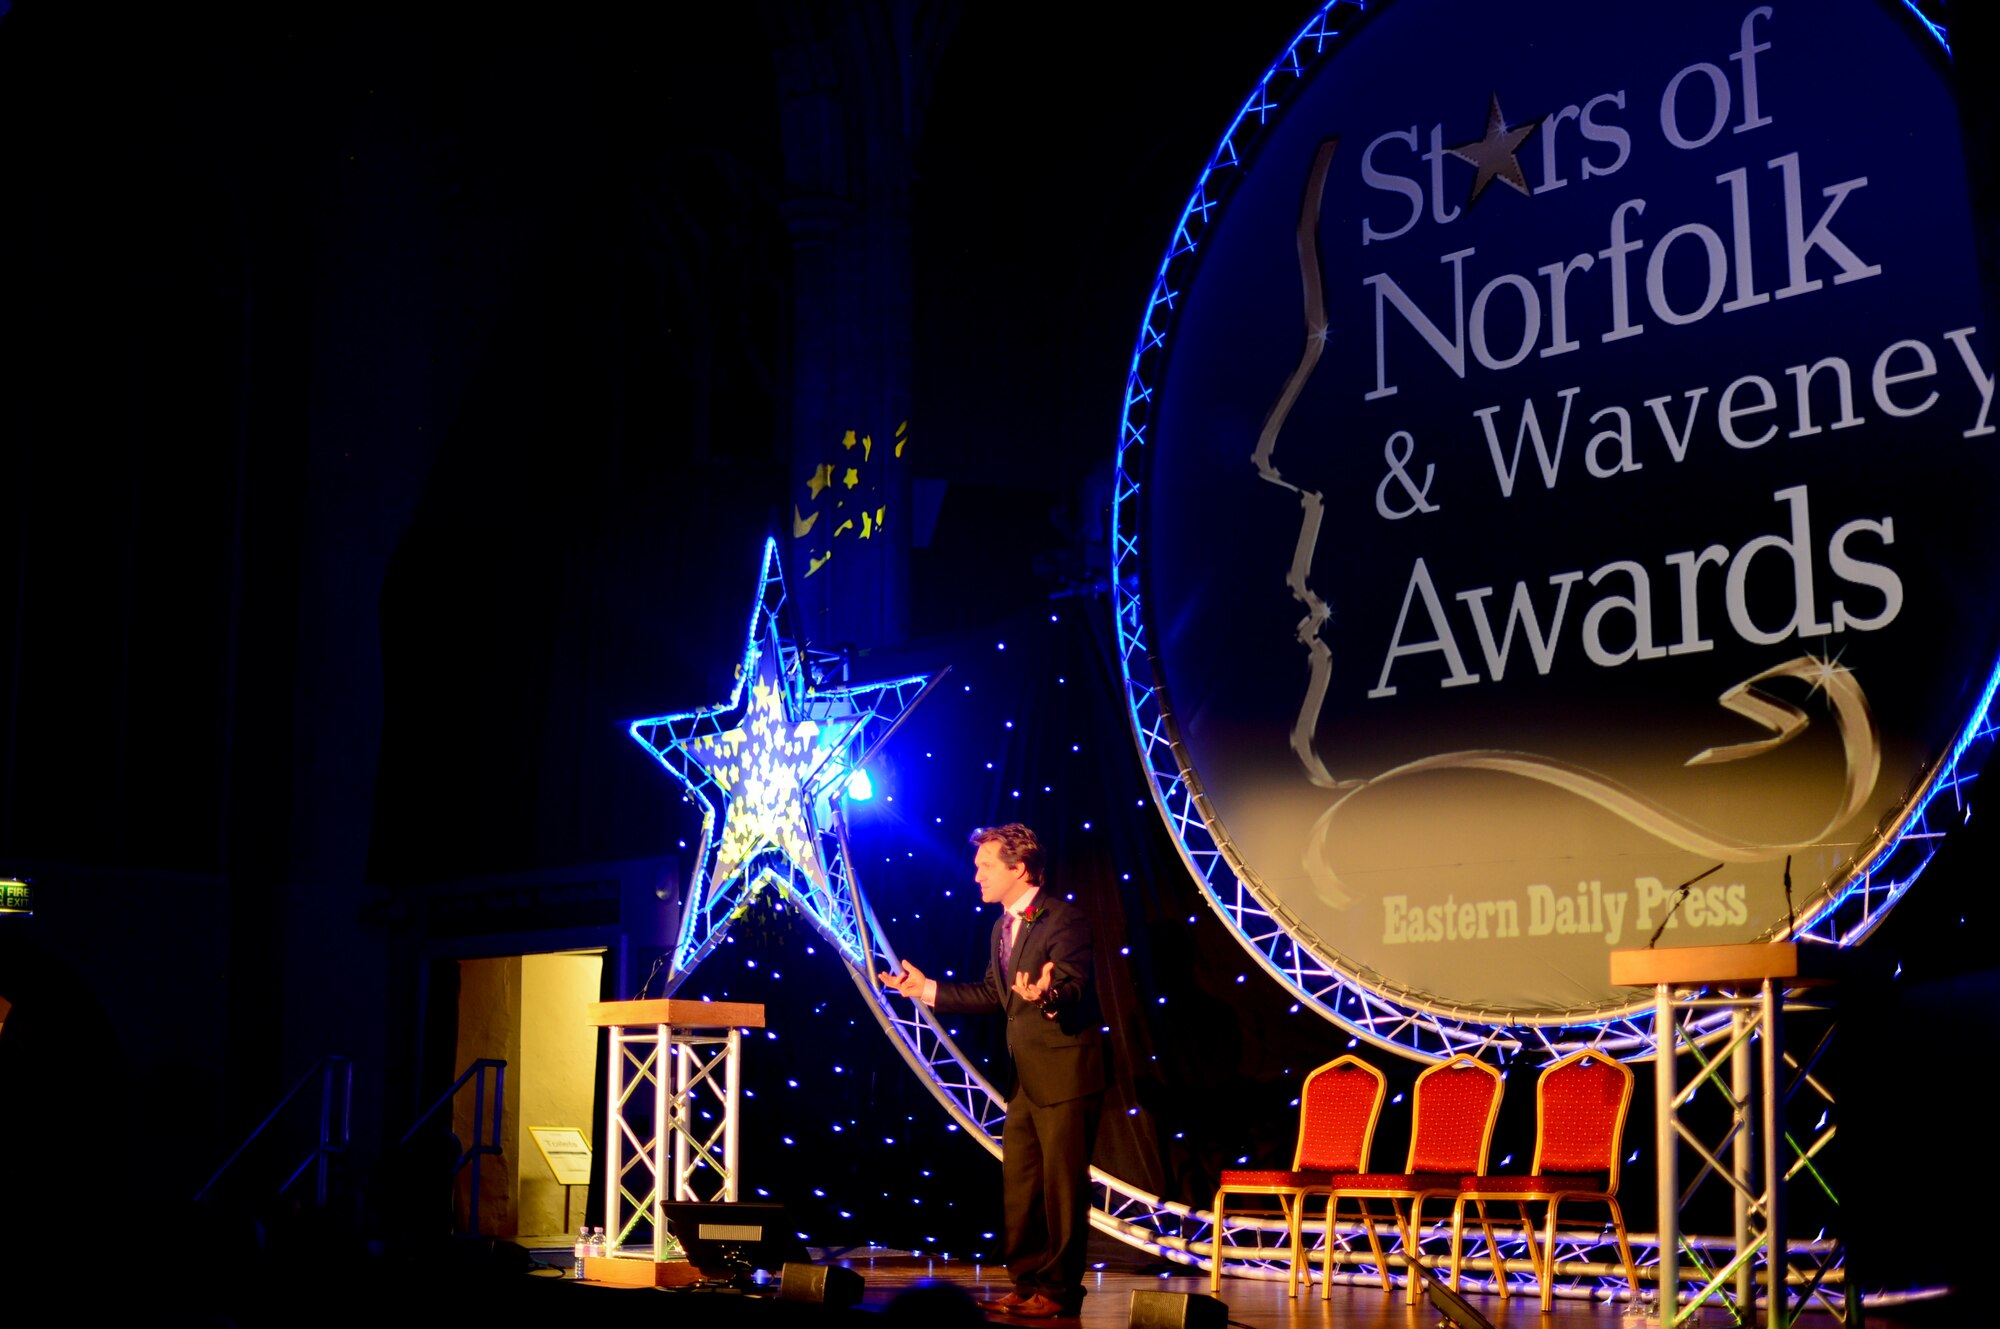 David Whiteley, BBC Radio and Stars of Norfolk and Waveney Awards host, provides opening remarks during the ceremony at St. Andrews Halls, Norfolk, England, Dec. 3, 2015. Staff Sgt. Eli Gordon, 492nd Aircraft Maintenance Unit activity security manager, was named the winner for the Armed Services Person of the Year award. (U.S. Air Force photo by Senior Airman Erin Trower)